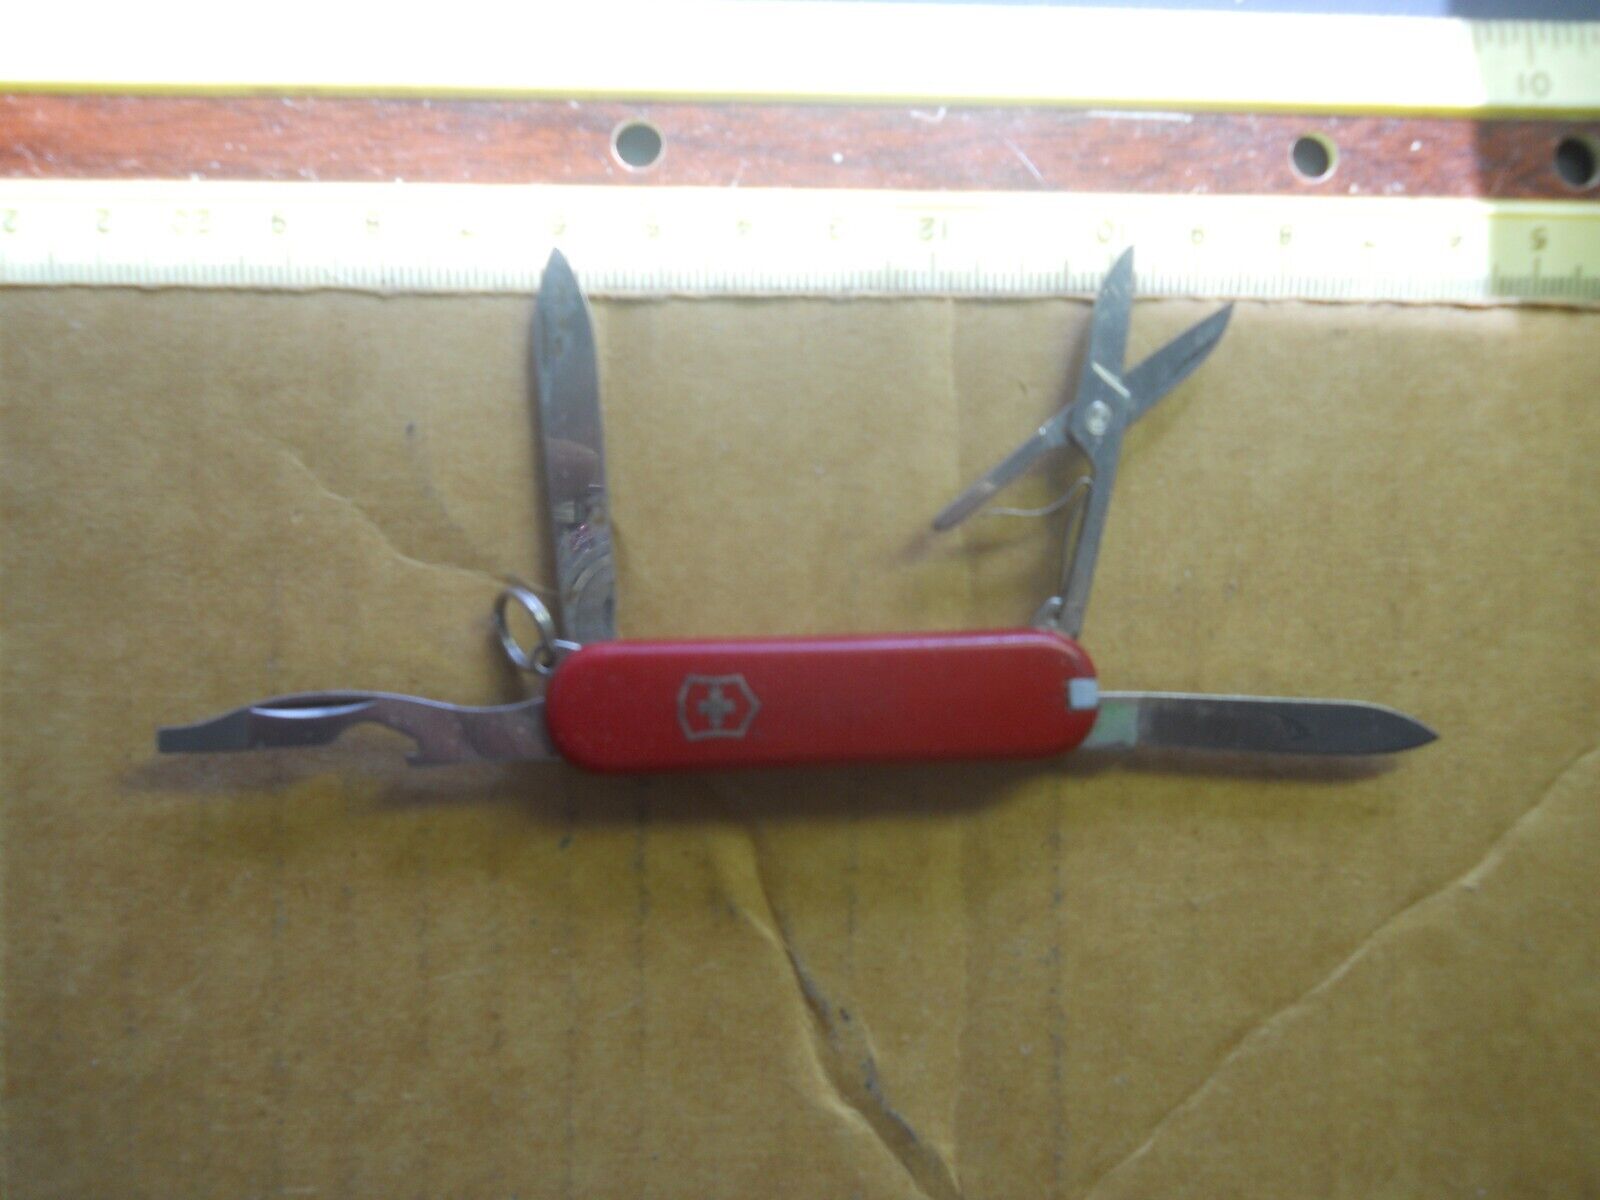 Victorinox Rogue Swiss Army knife in  red   or black